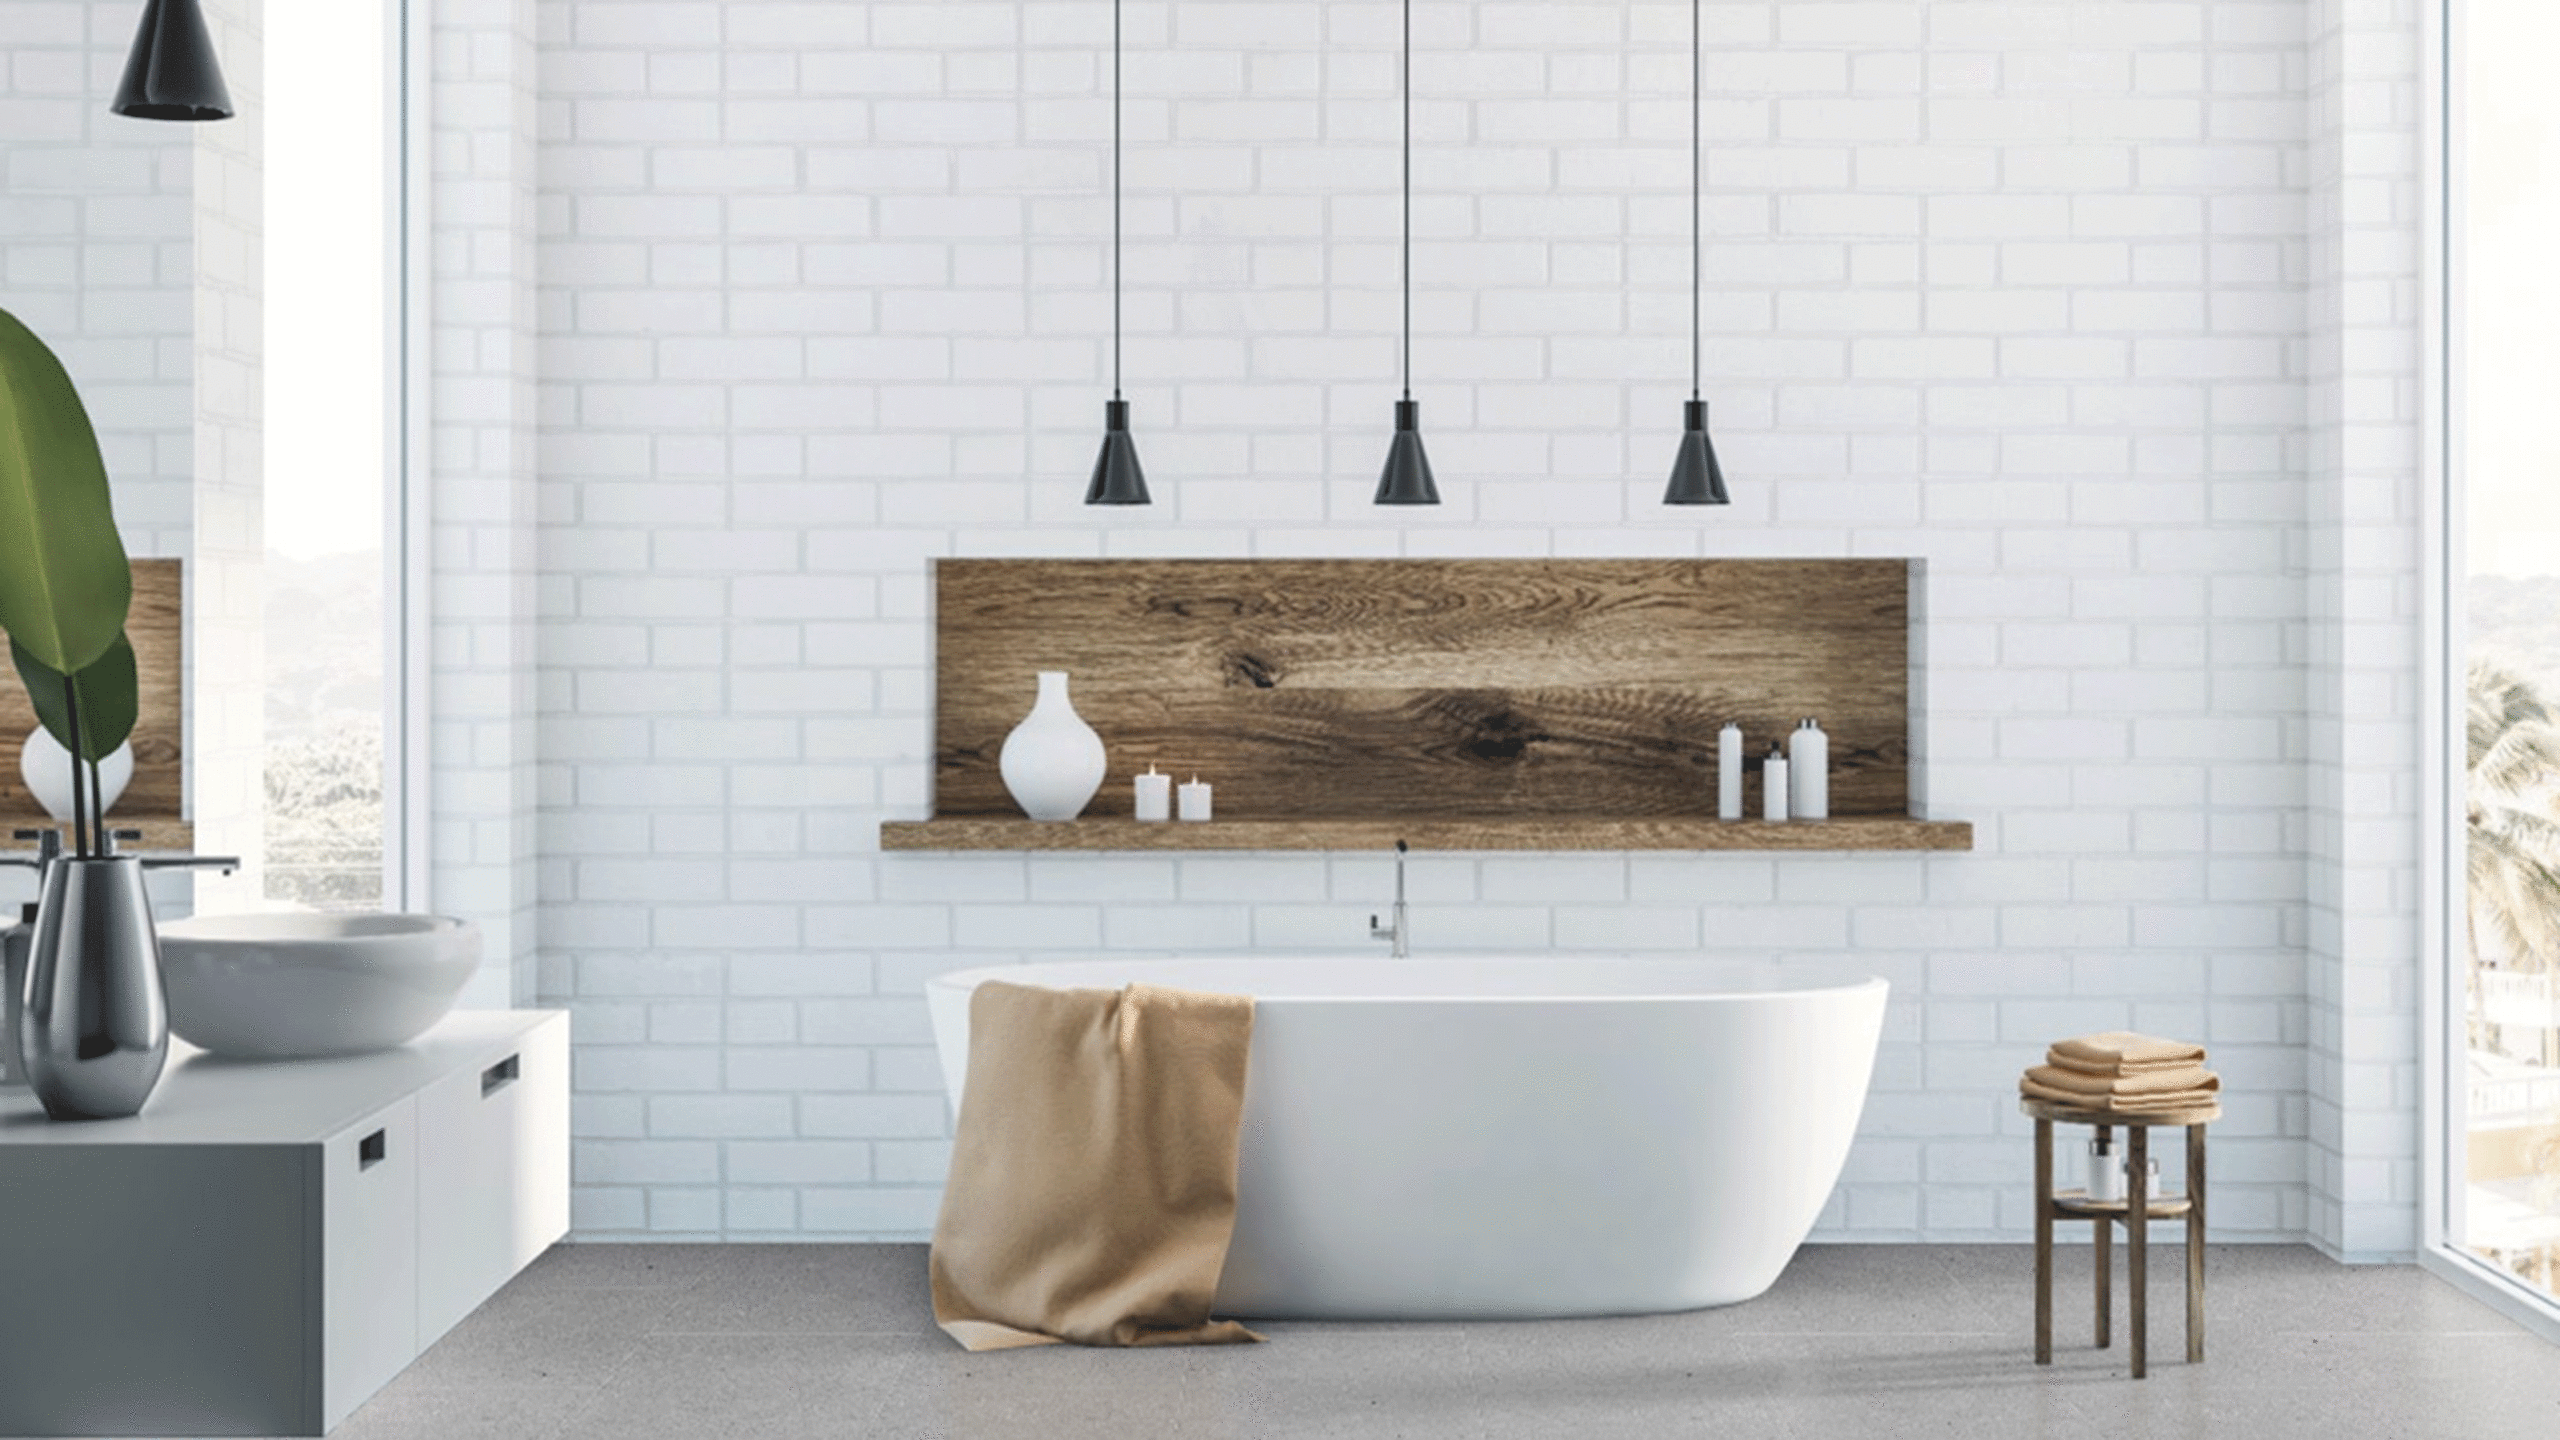 Top Bathroom Free Stuff: Enhancing Your Space on a Budget